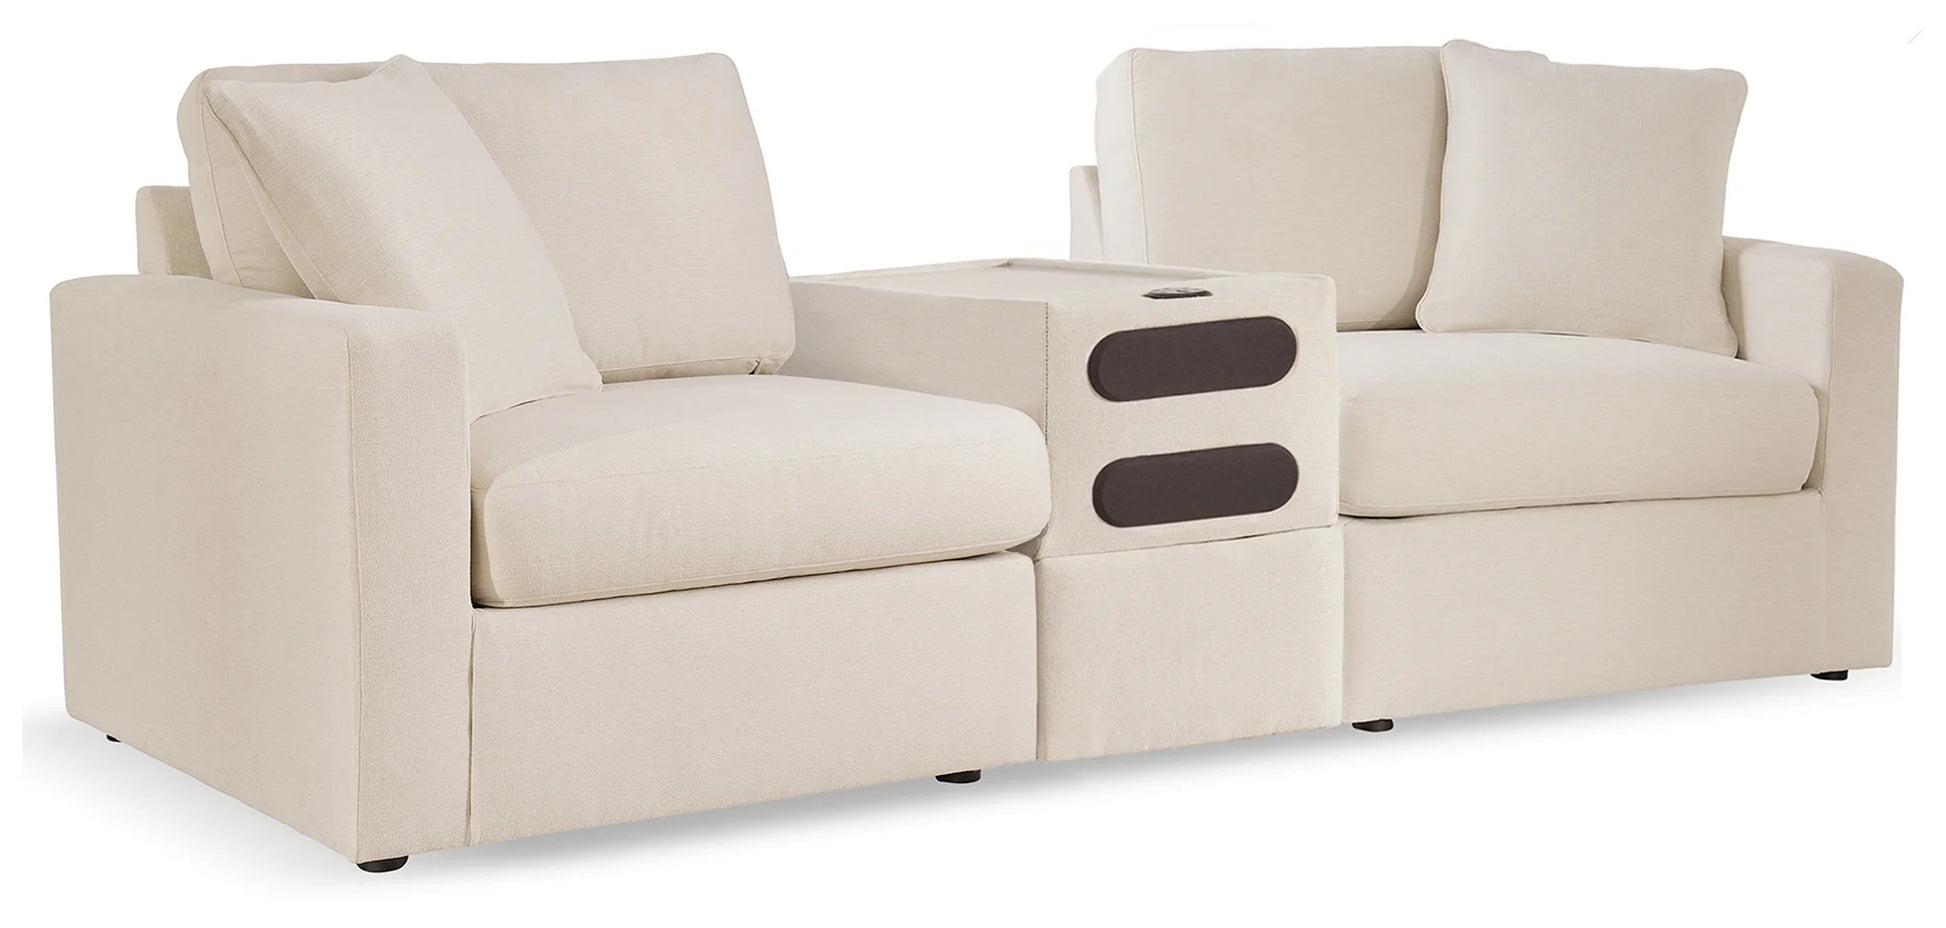 Modmax - Oyster - 3-Piece Sectional With Audio System Console